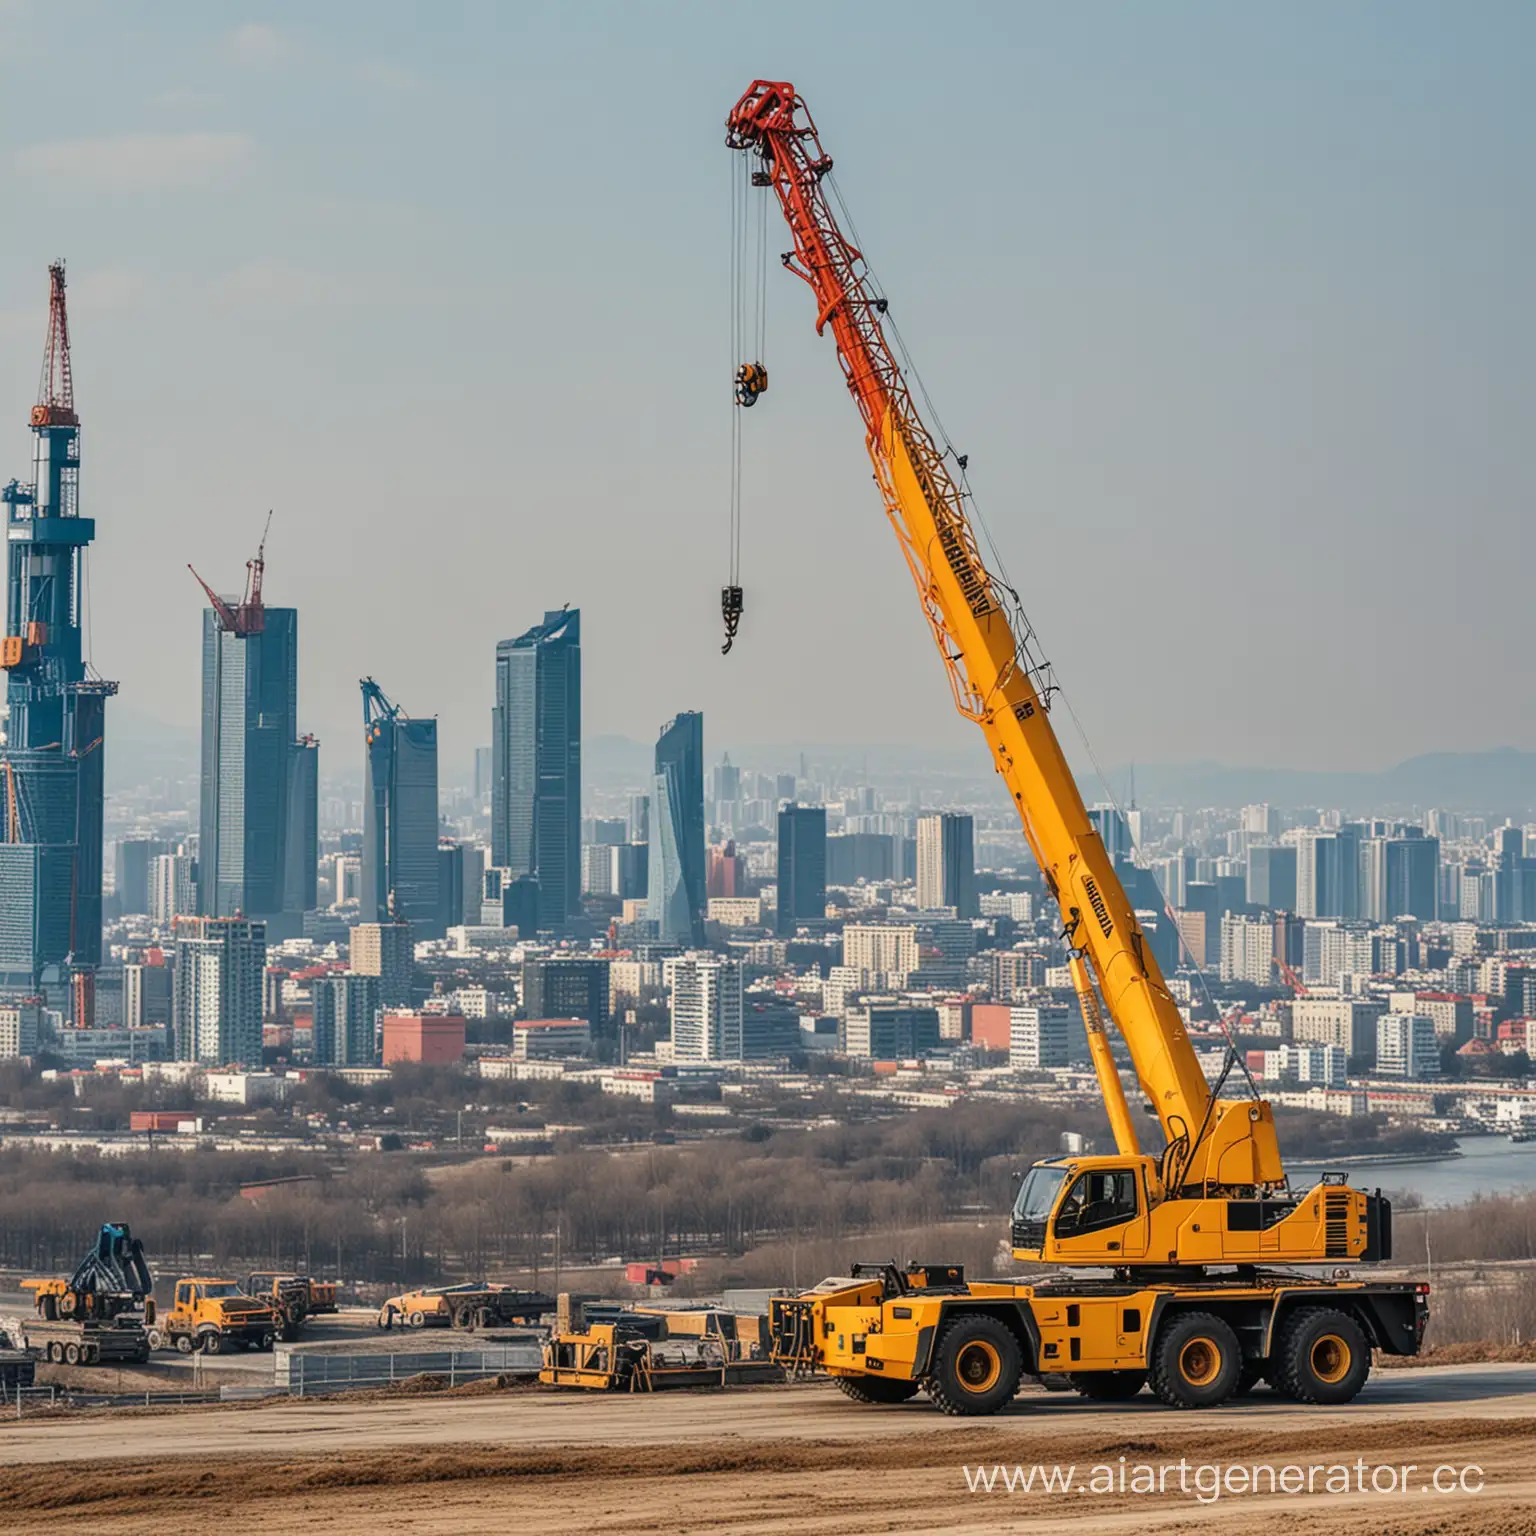 City-Construction-Equipment-in-Action-Auto-Crane-Aerial-Platform-and-More